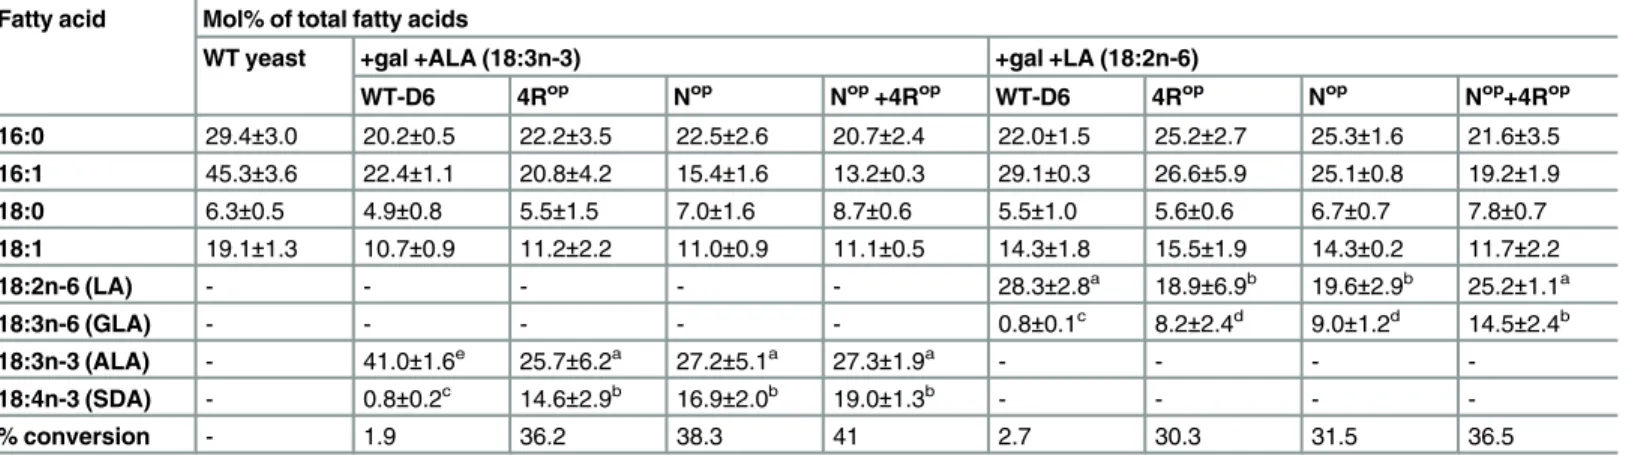 Table 3. Fatty acid analysis of WT and transgenic yeast cells expressing codon-optimized variants of PinD6.